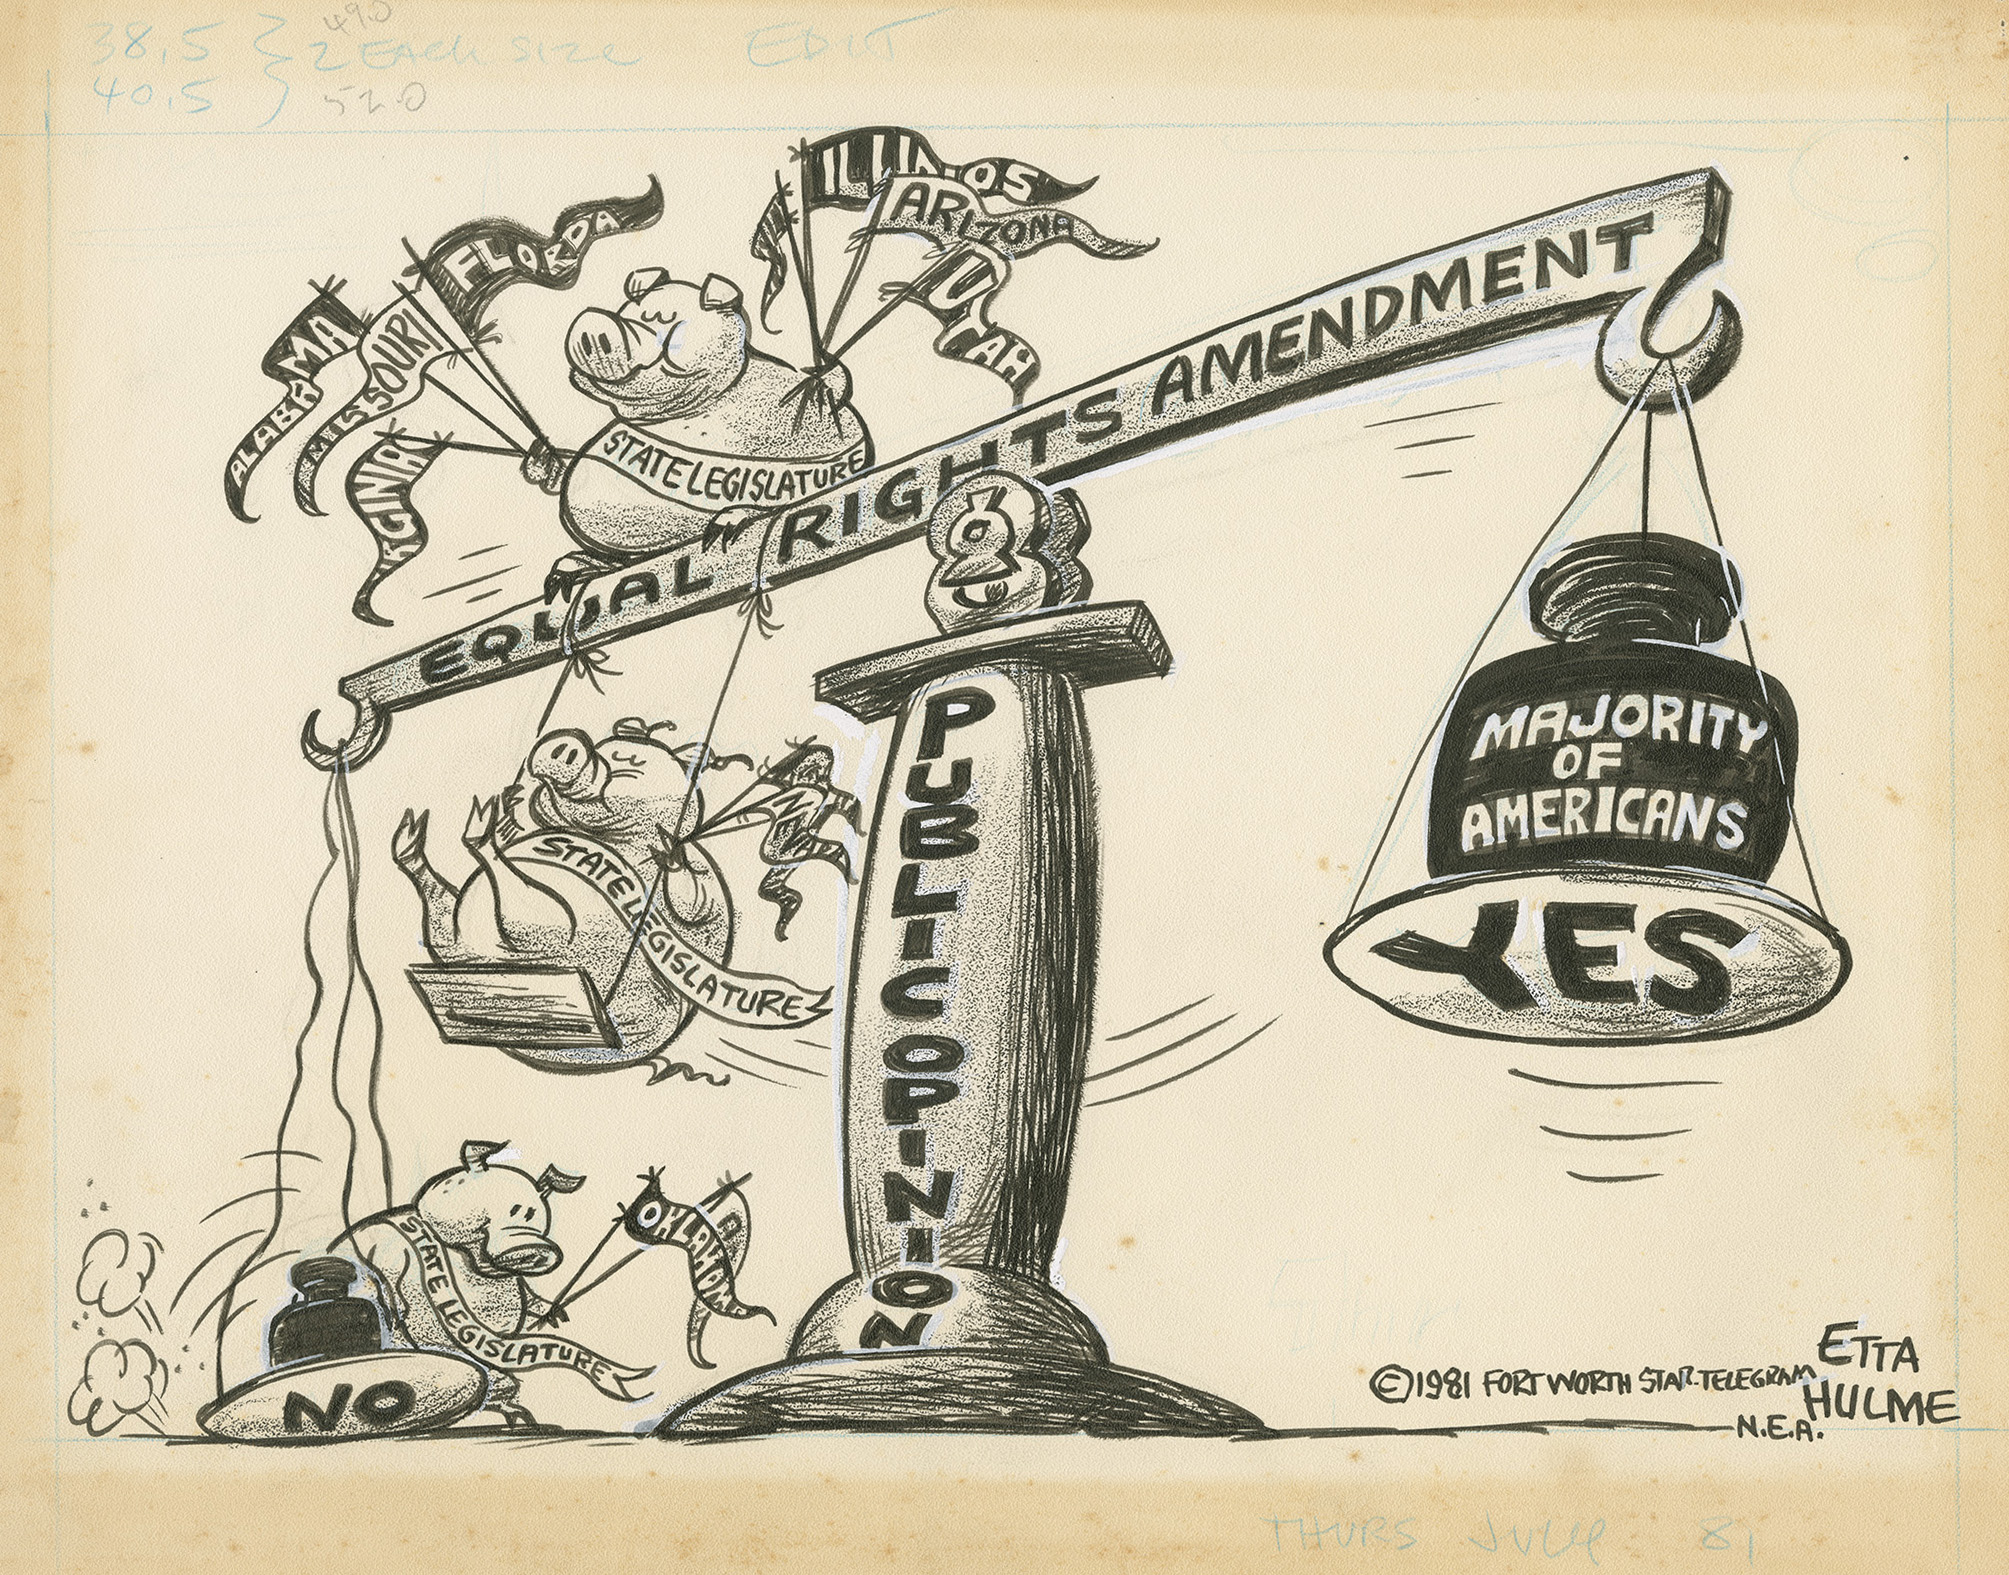 Editorial cartoon by Etta Hulme (1981) depicting public opinion on the Equal Rights Amendment (ERA) where a large weight for the “Majority of Americans” on the “YES” scale side is lighter than the smaller weight for the “NO” scale side, which is weighed down by three pigs with the label “State Legislature” holding flags for Florida, Alabama, Missouri, Virginia, Illinois, Arizona, Utah, and Oklahoma